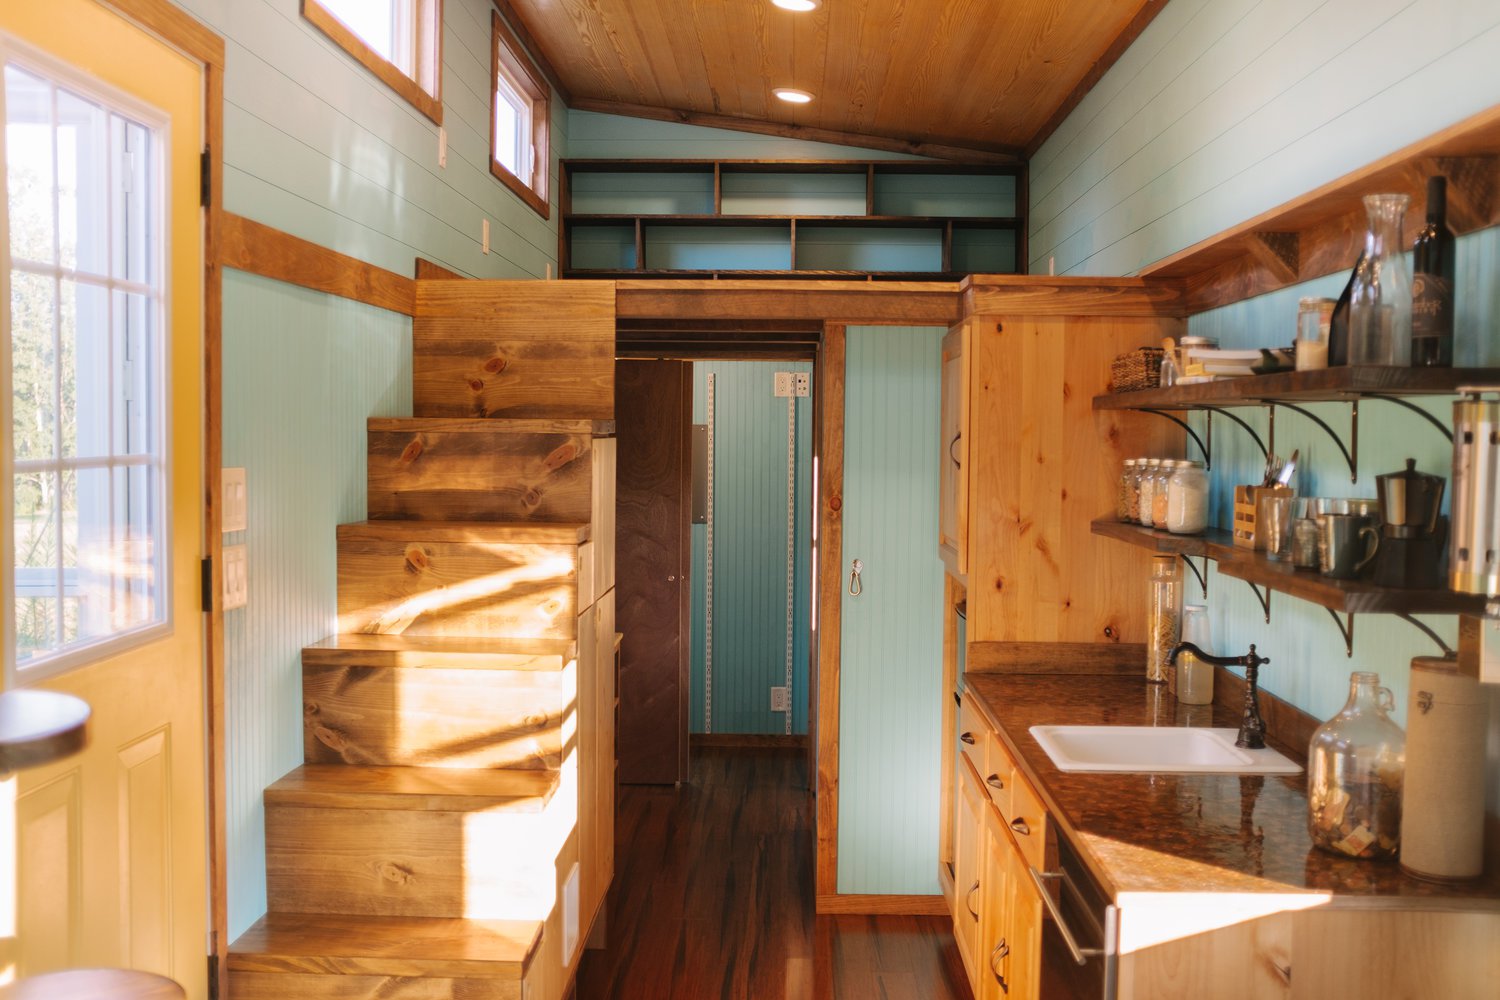 The-Big-Whimsy-30ft-Tiny-Home-by-Wind-River-Tiny-Homes-002-Kopie